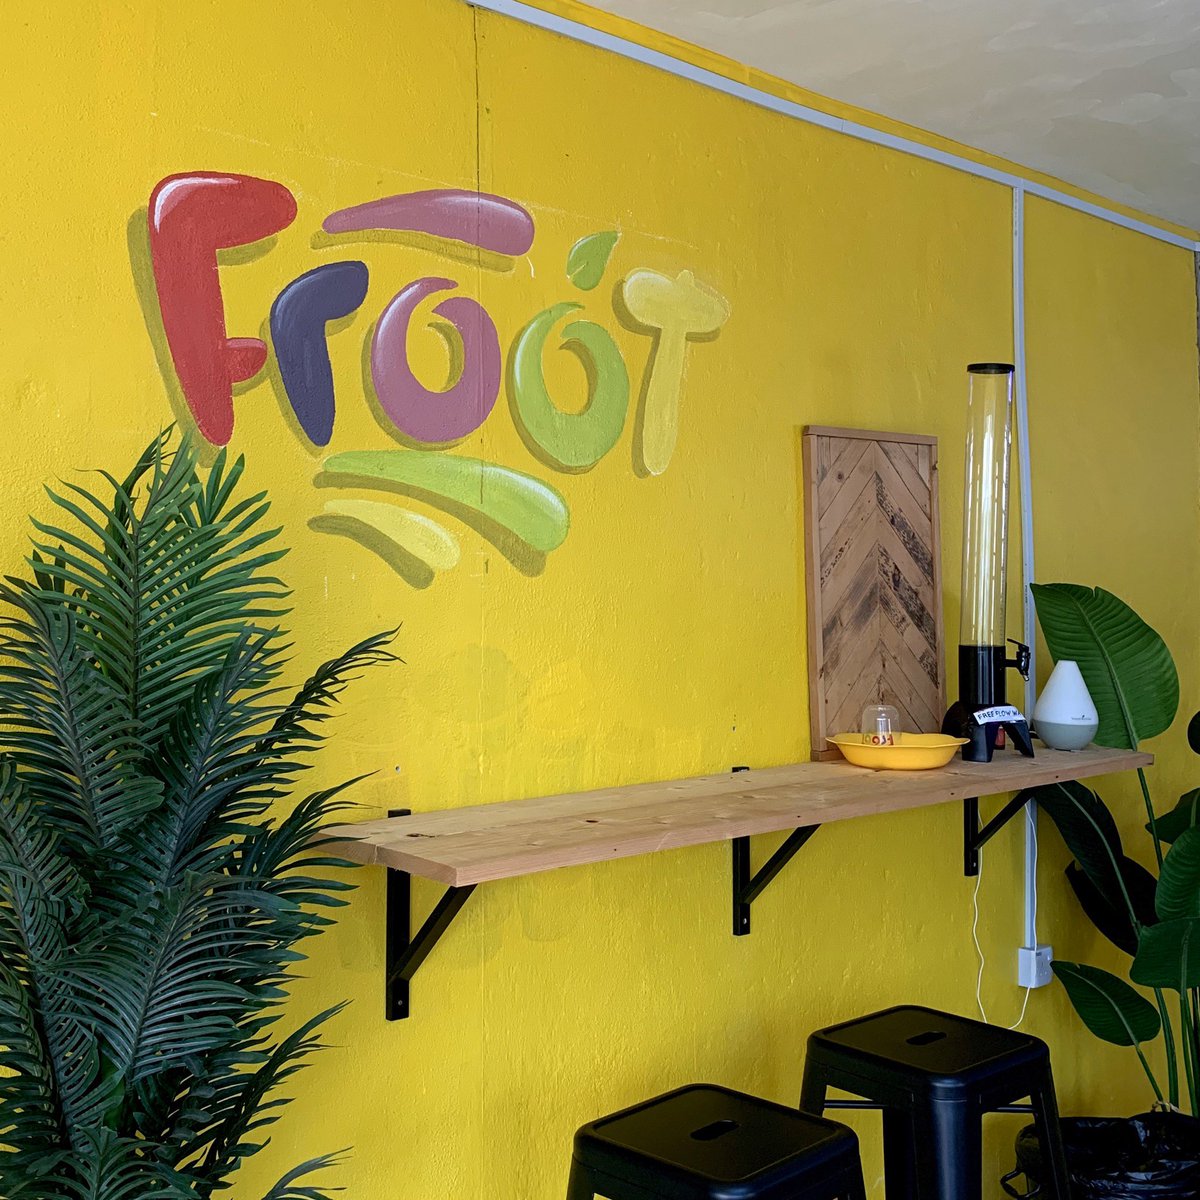 Froot MYnok sene cari waze je "Froot MY"  this hidden cafe serves eggette waffle, oden, soft serve & many more. go & follow their instagram for more updates!